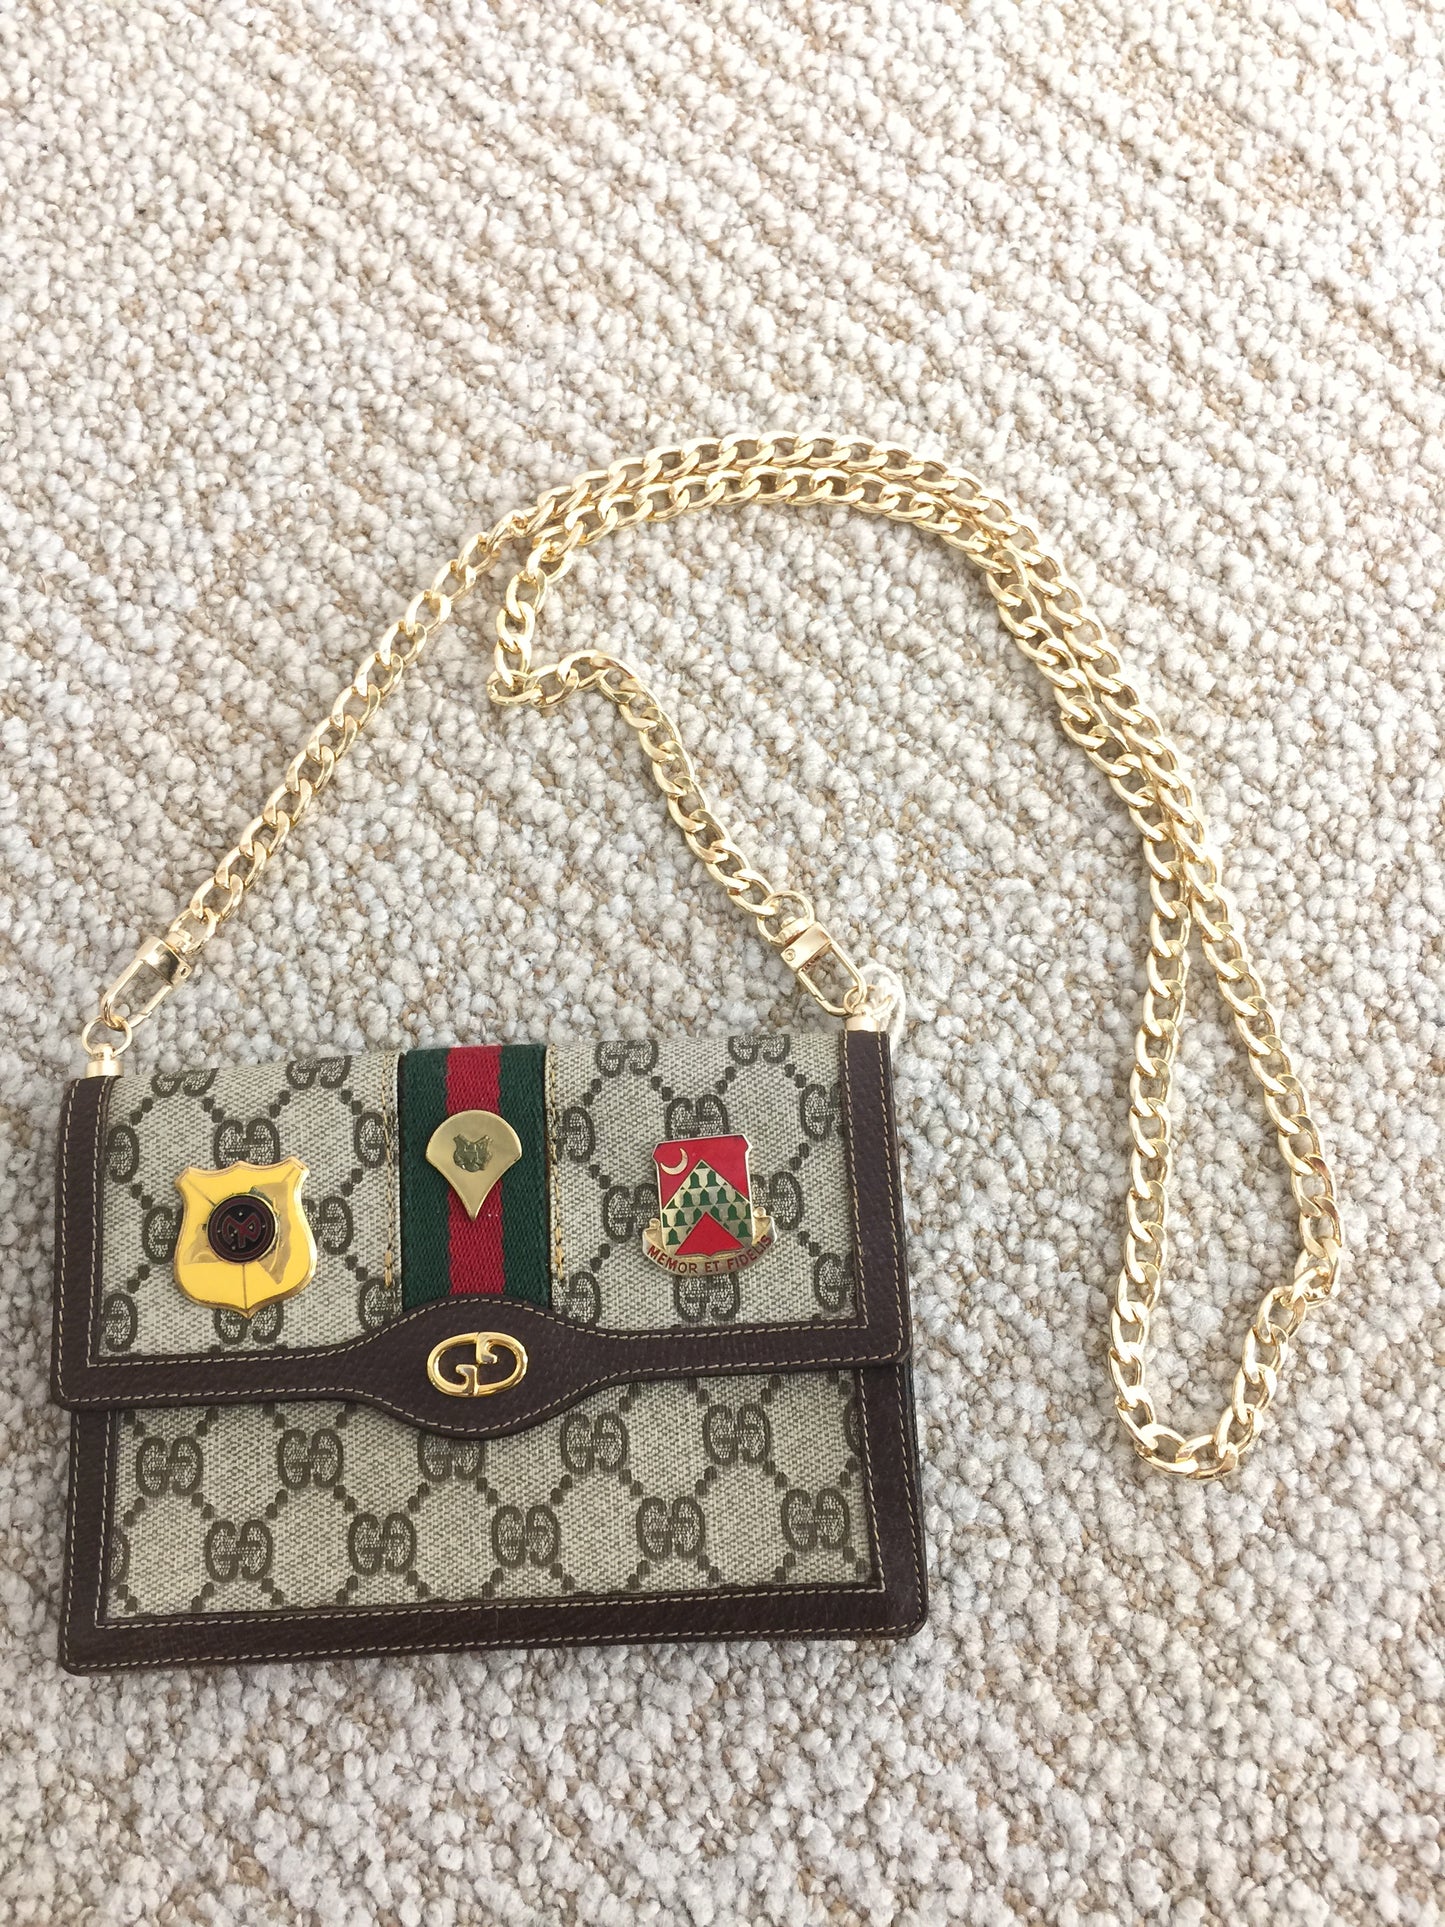 LS Upcycled GG Vintage Military Pin Purse